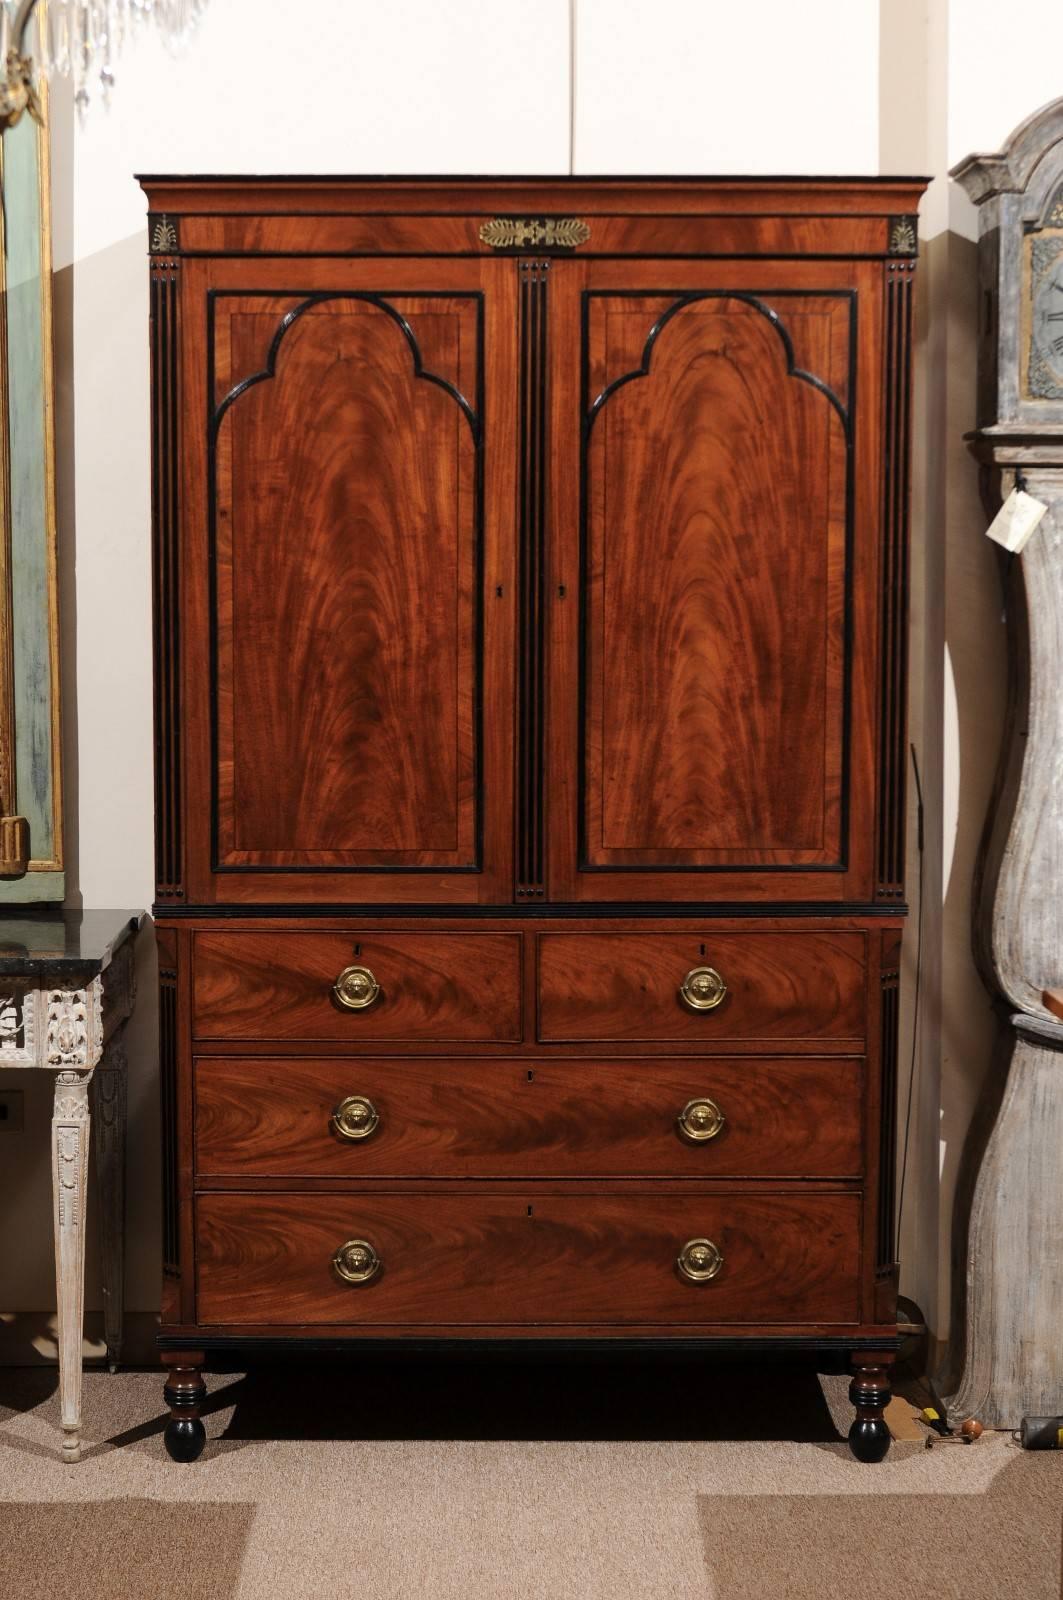 Regency gilt-metal mounted and part ebonized mahogany linen press with arched paneled doors enclosing three sliding shelves, four drawers below and turned feet.